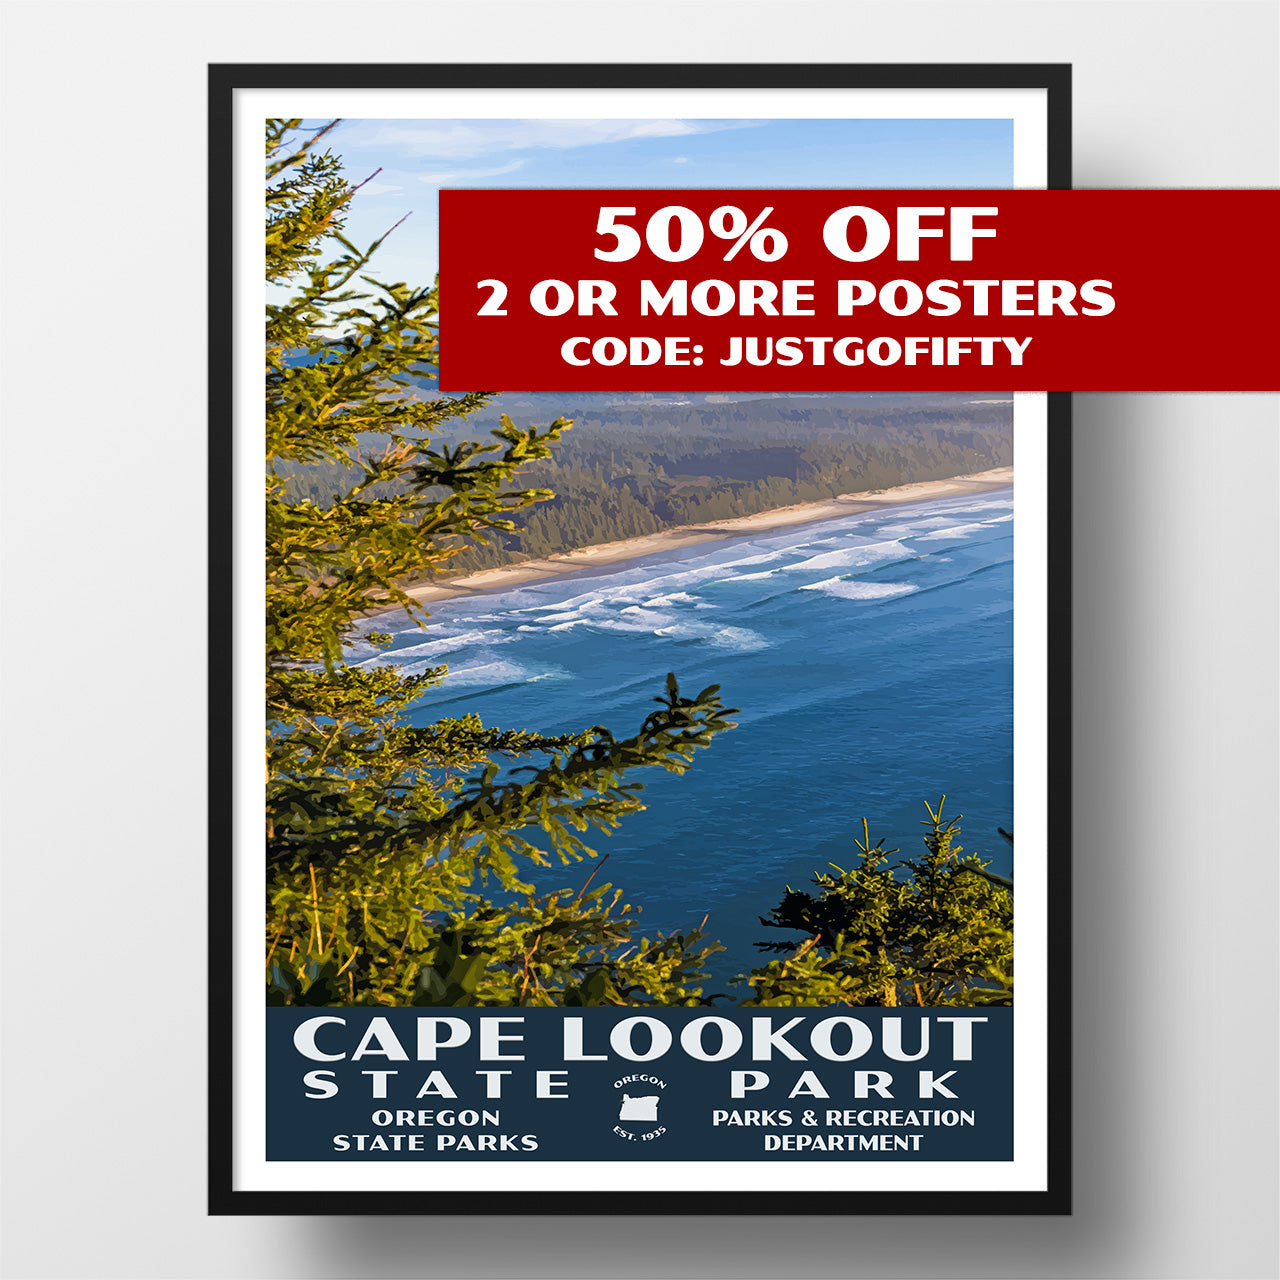 Cape Lookout State Park poster